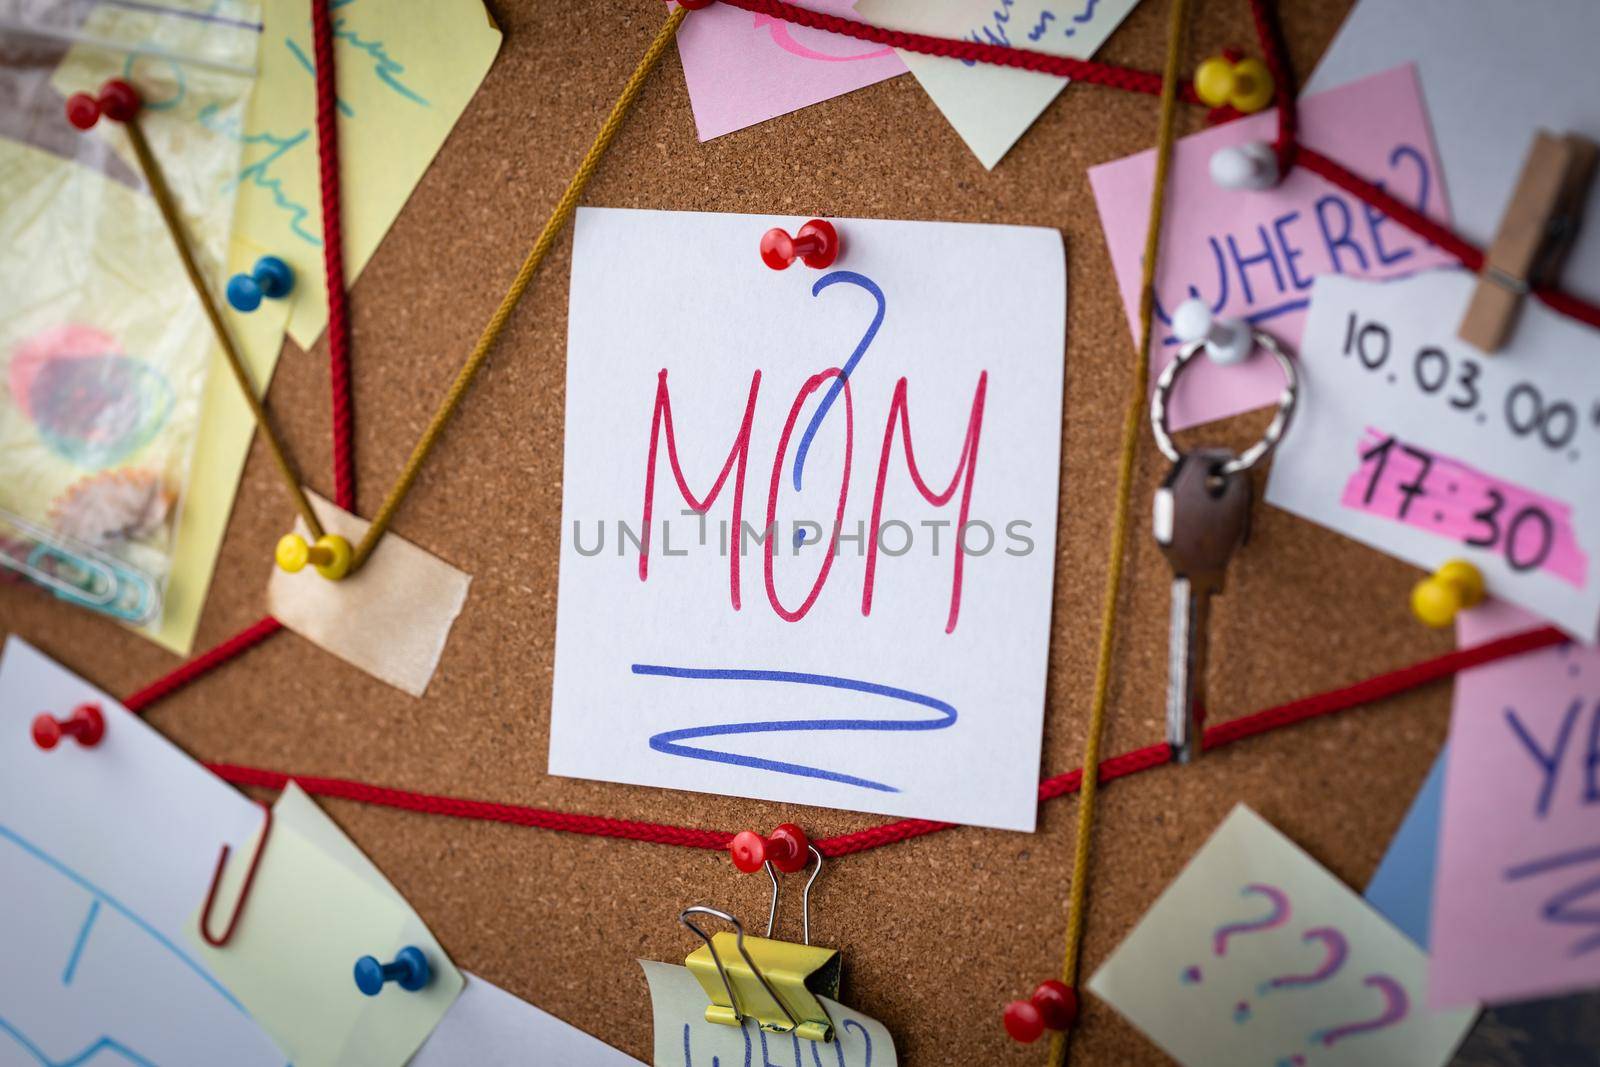 Mom search concept. Close-up view of a detective board with evidence. In the center is a white sheet attached with a red pin with the text Mom.